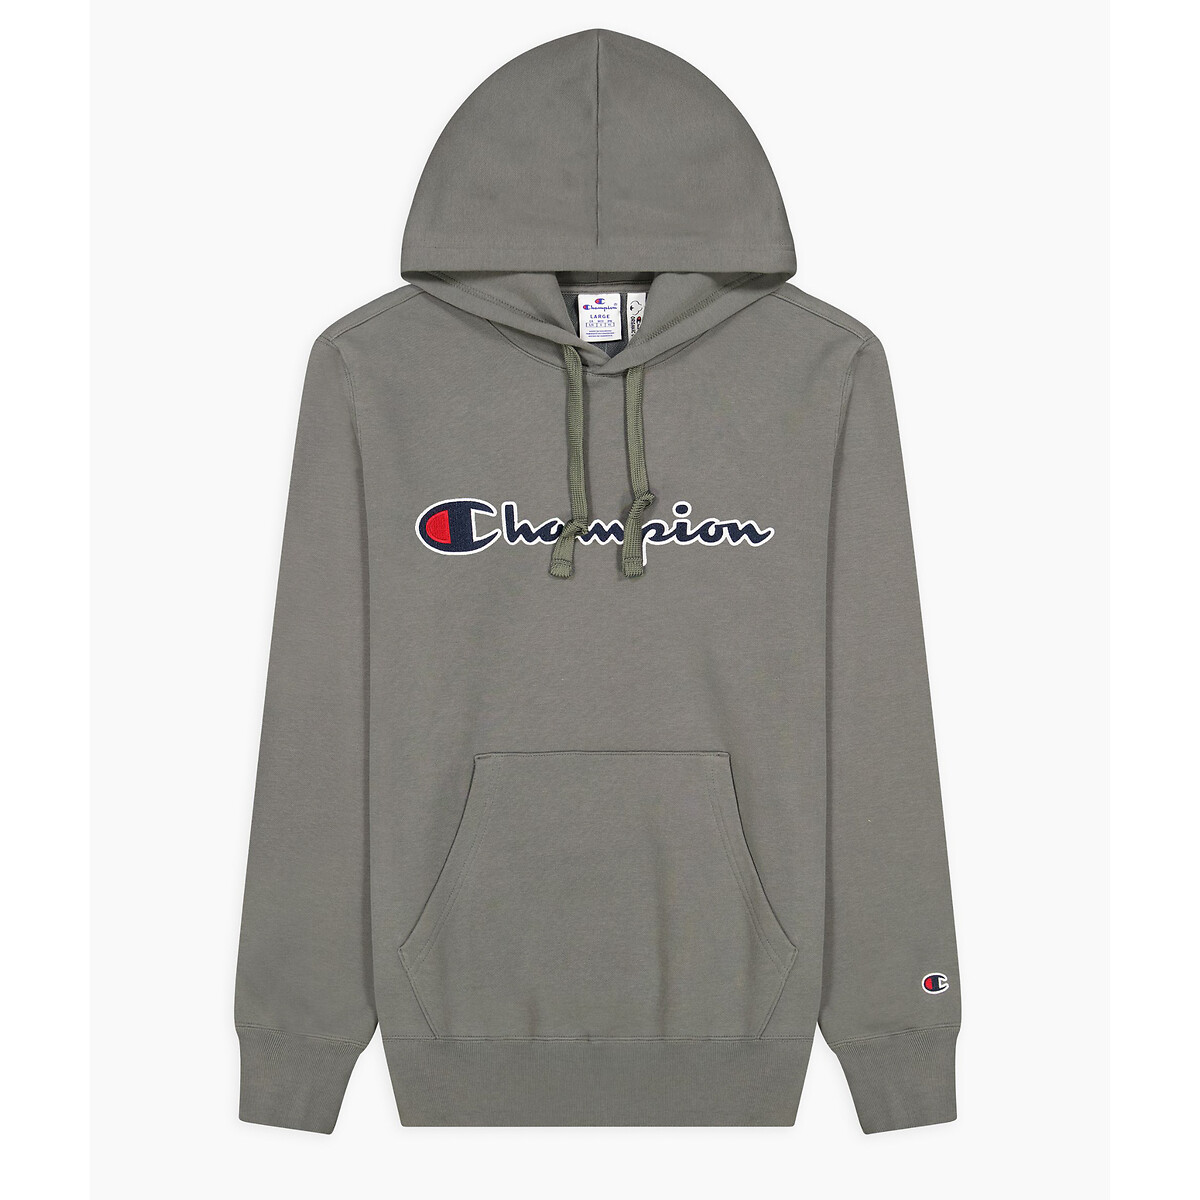 SUDADERA CHAMPION GRIS EMBROIDERED SCRIPT LOGO HOODIE Tallas S Color Gris